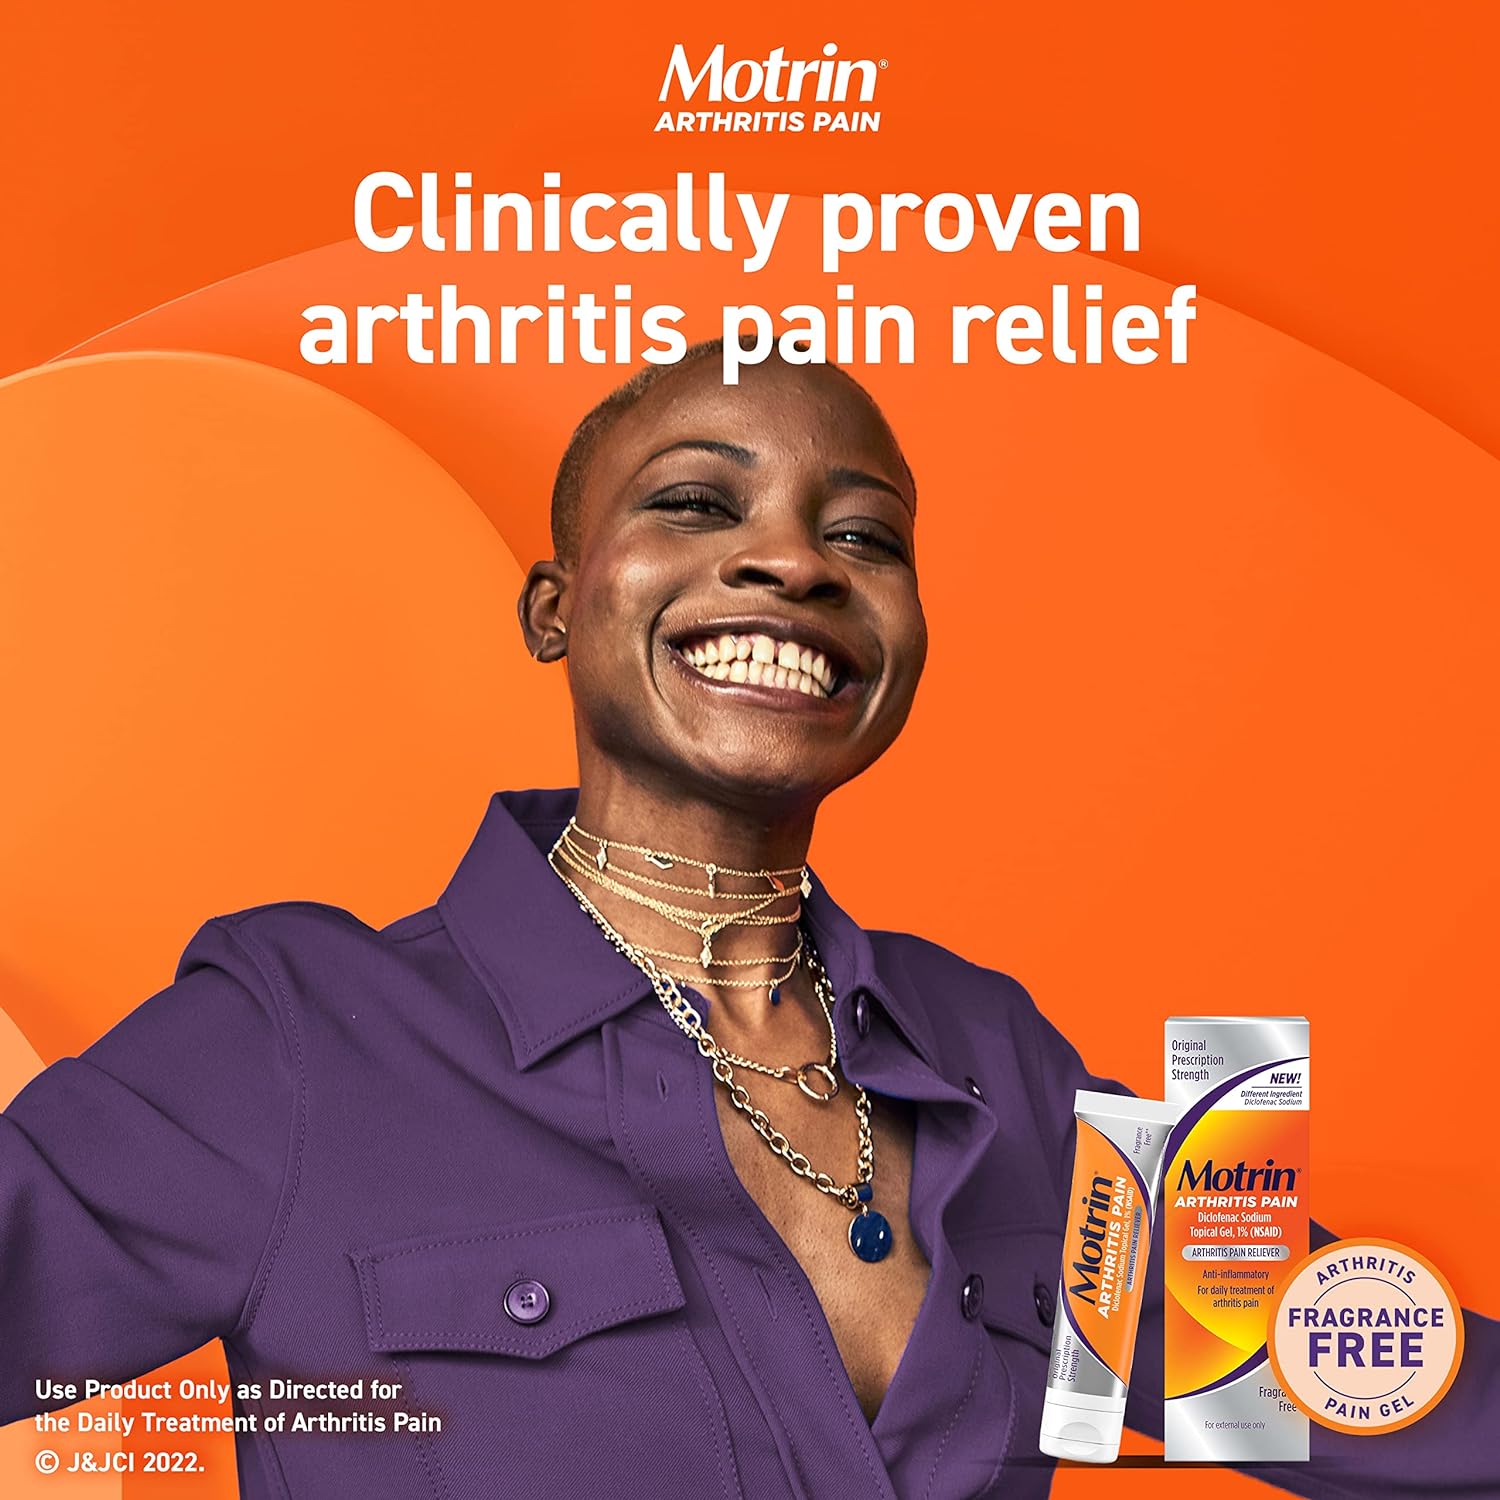 Motrin Arthritis Pain Relief Diclofenac Sodium Topical Gel 1%, Anti-Inflammatory Cream for Arthritis Pain in Hands, Wrists, Elbows, Knees, Feet & Ankles, NSAID Pain Relief Gel, 1.76 Oz : Health & Household